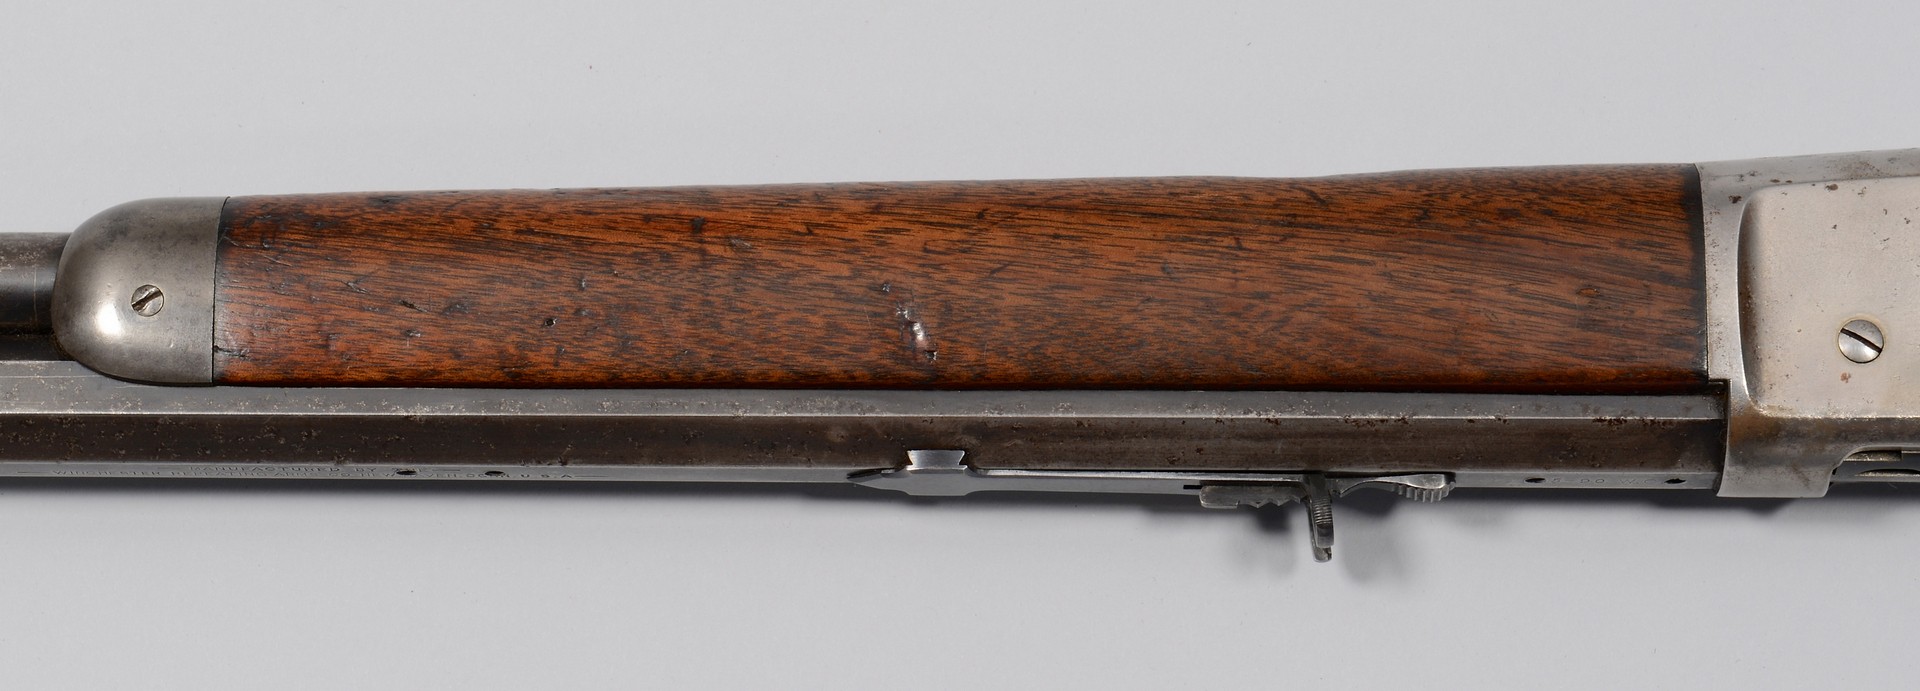 Lot 575: Winchester Lever Action 86